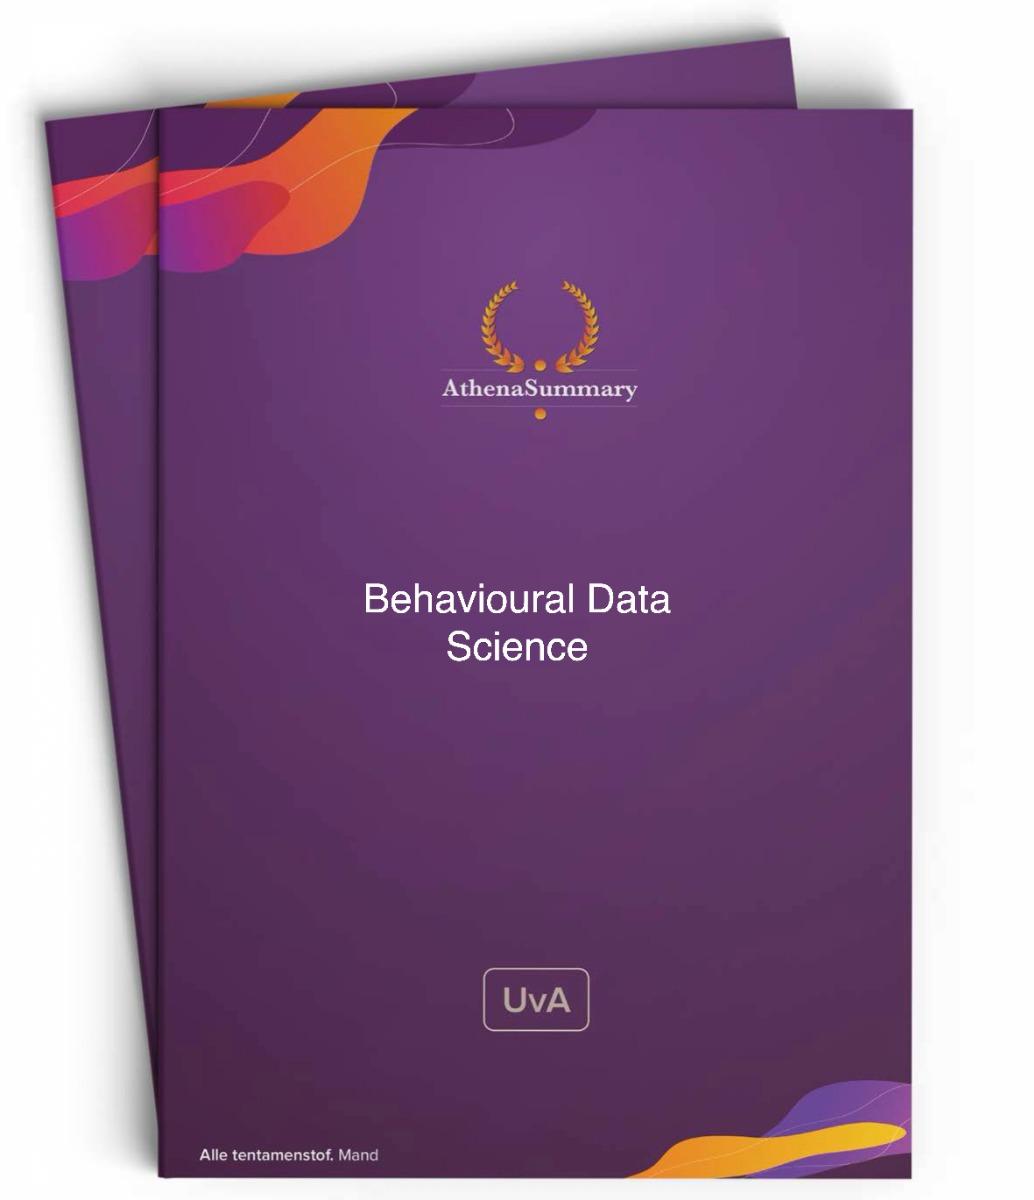 Literature and Lecture Summary: Behavioural Data Science